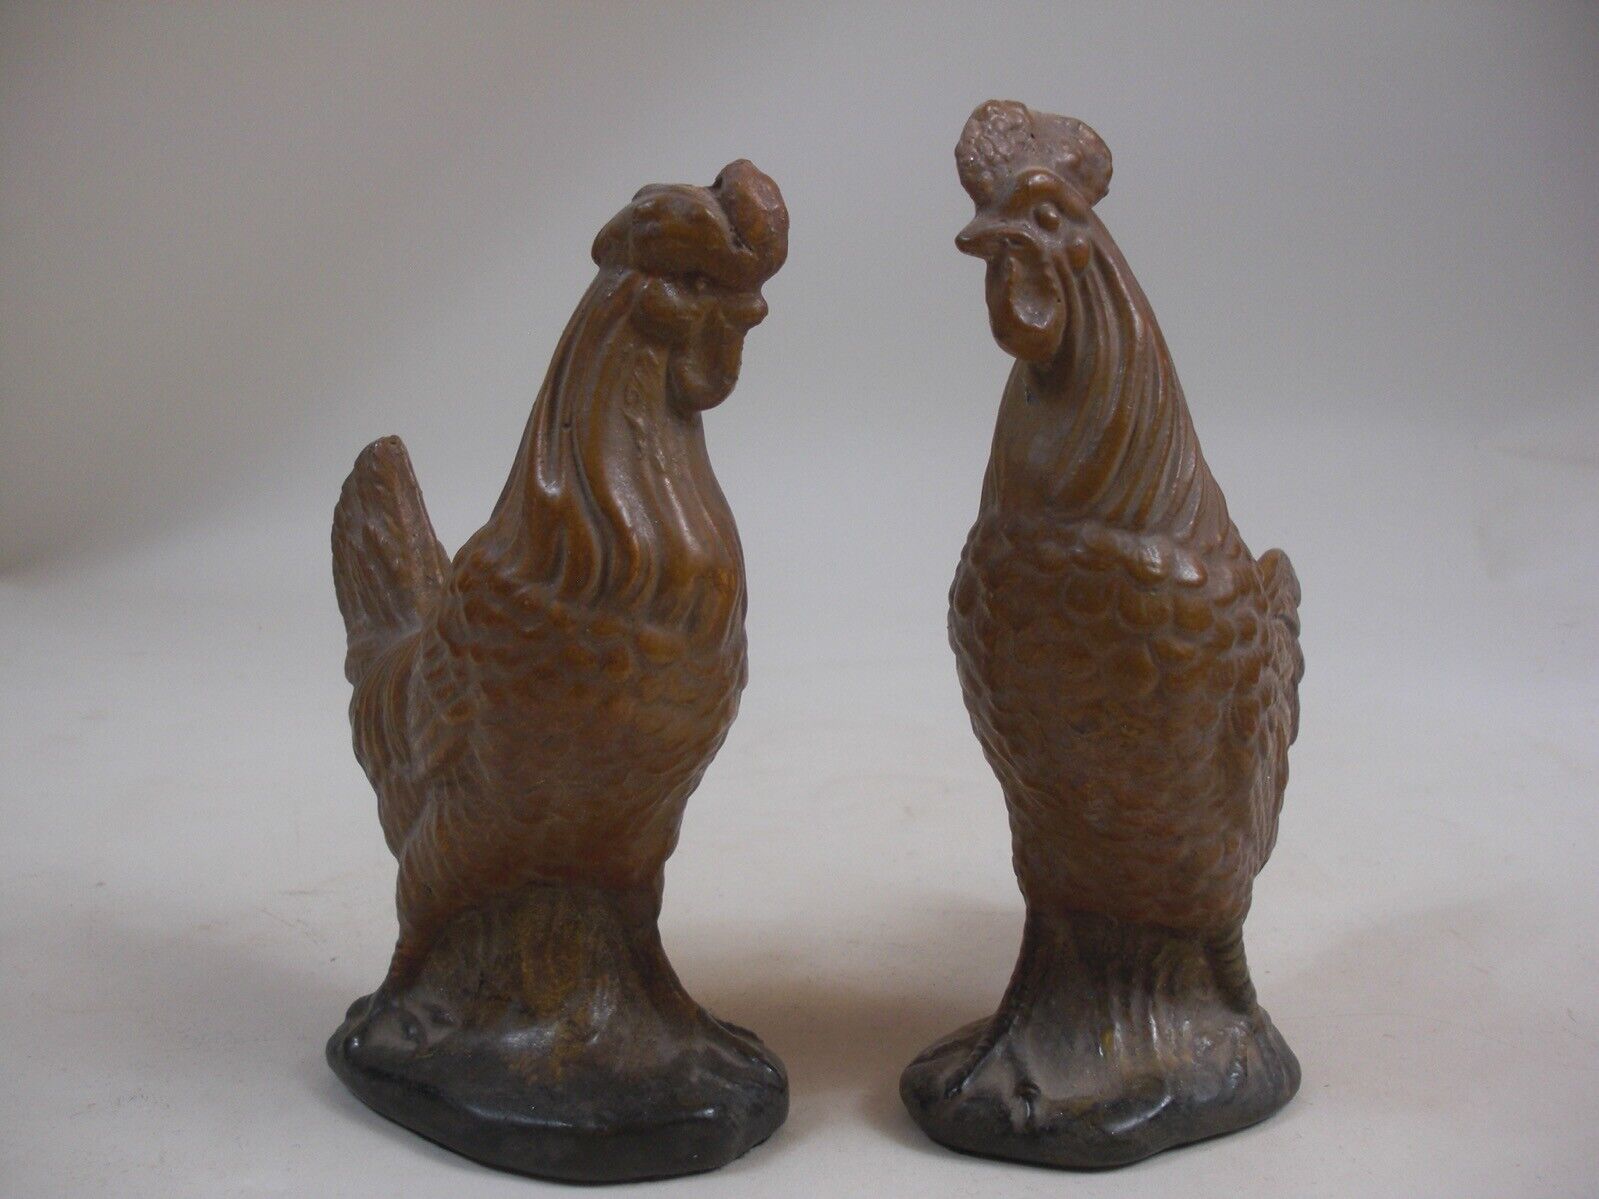 Chicken & Rooster Statue Figurines - Faux Majolica English Grand Tour Style